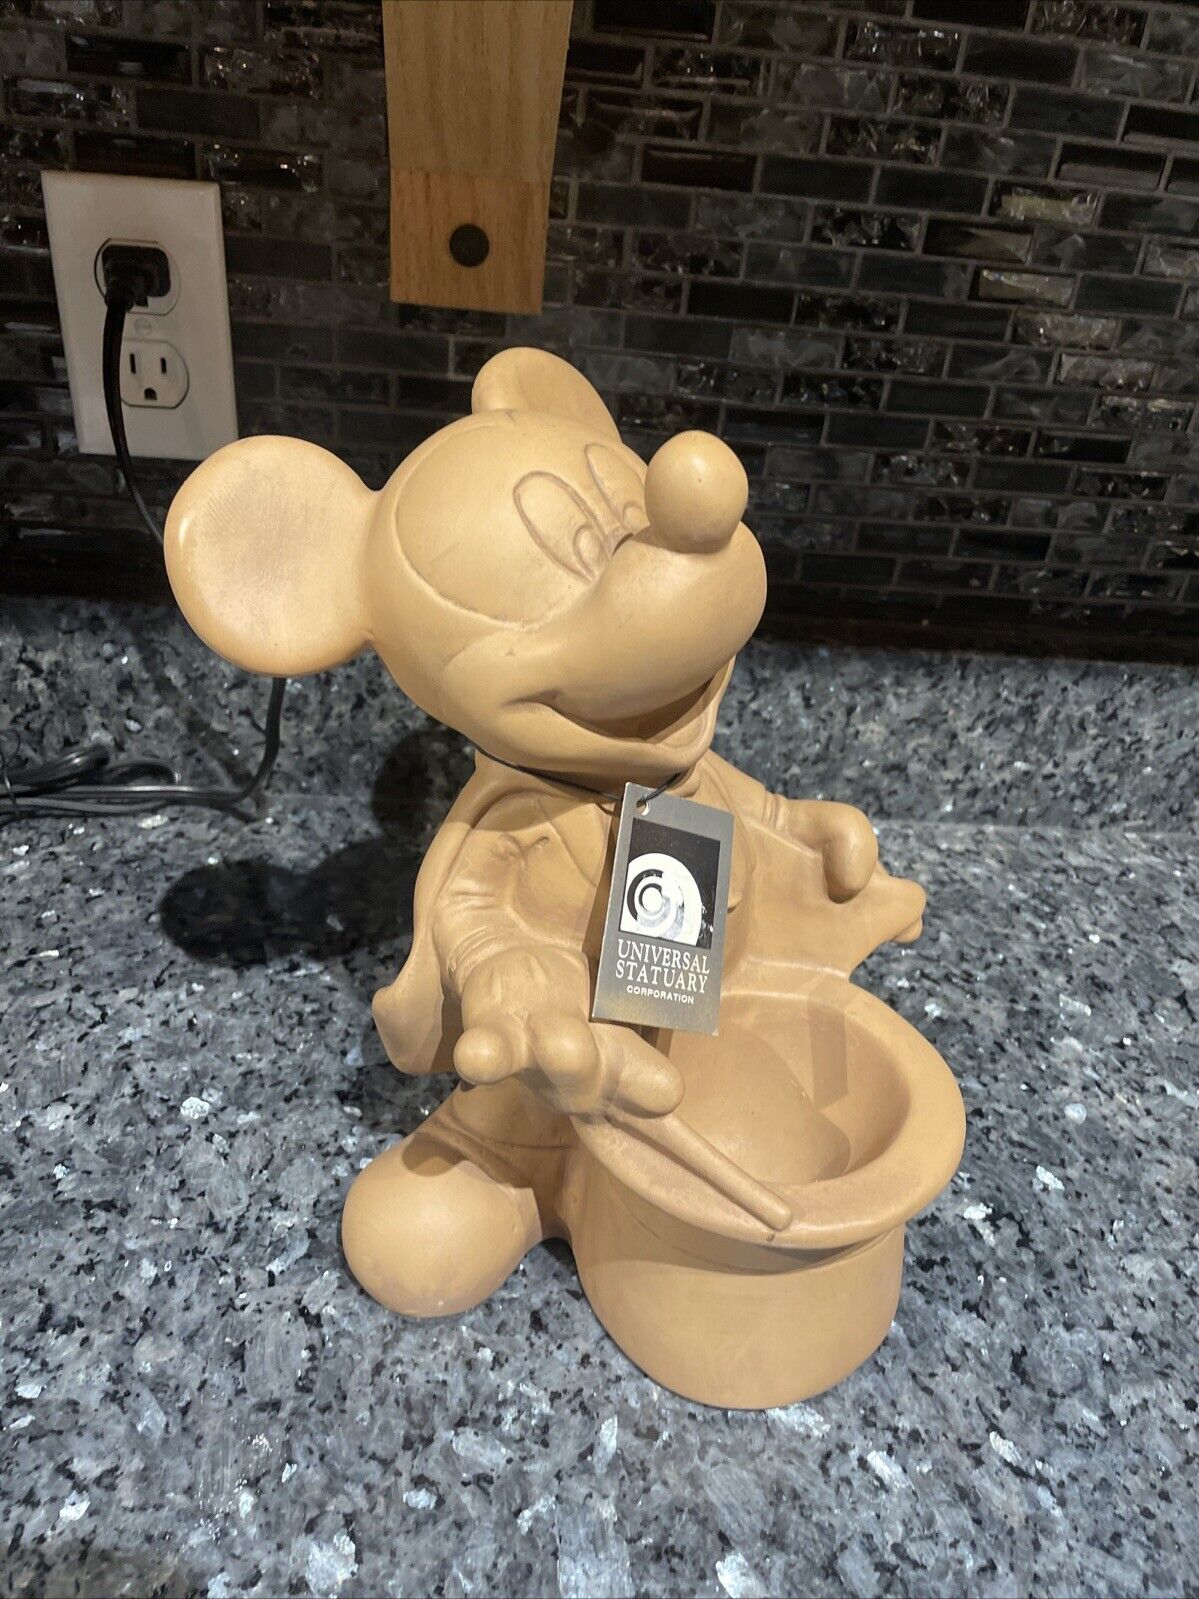 1997 Disney Universal Statuary Magician Mickey Mouse 11” Indoor/Outdoor Planter